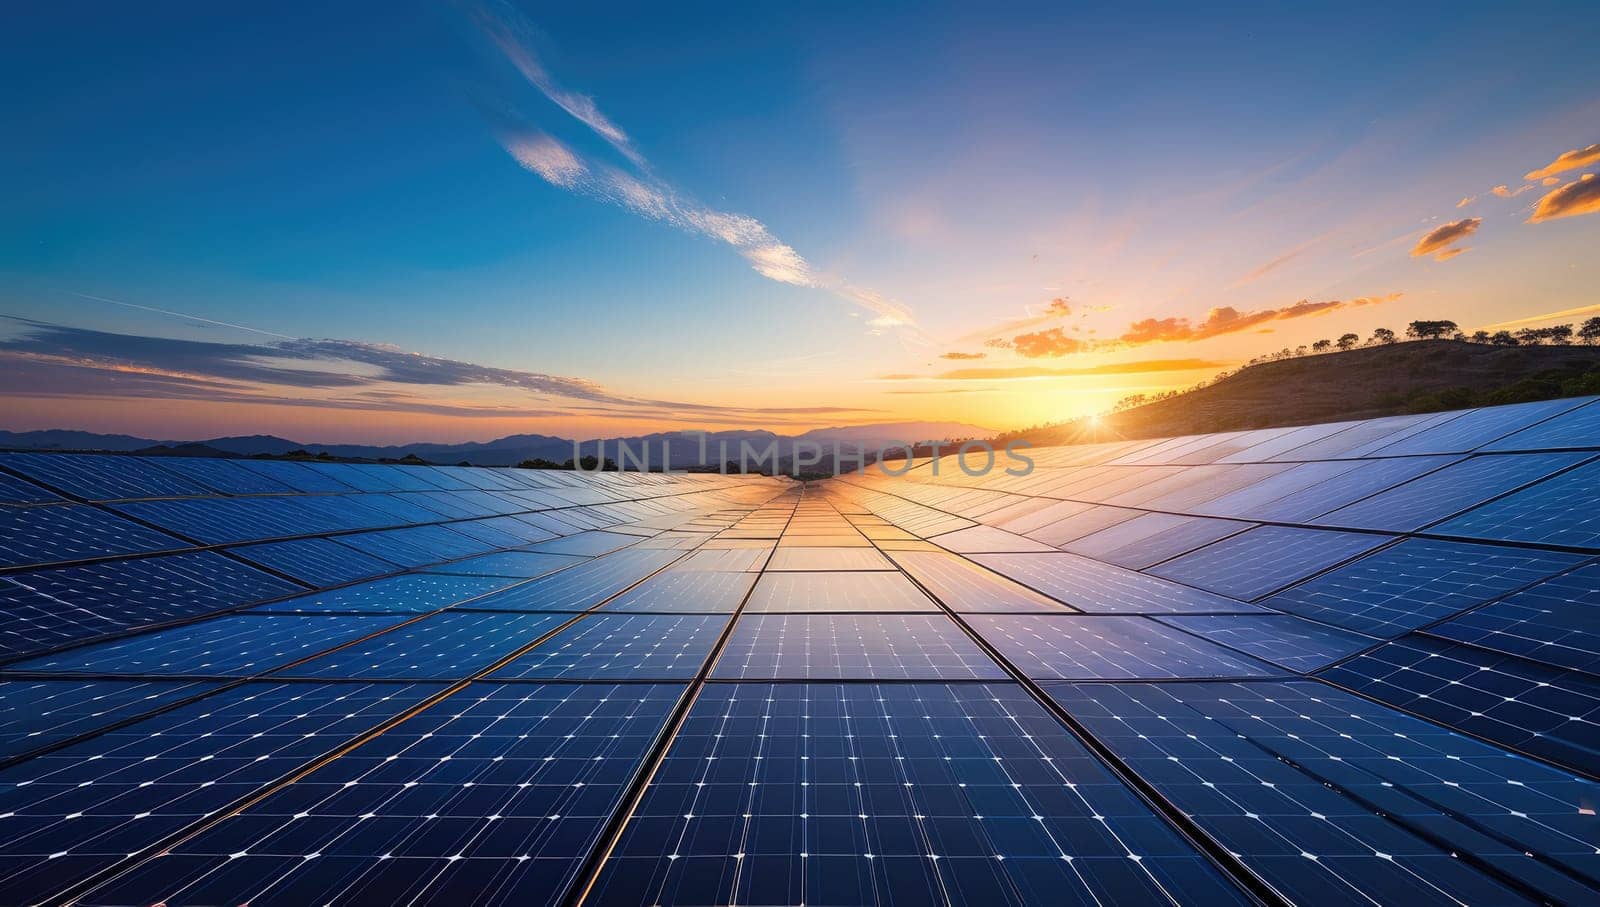 solar energy at sunset, photovoltaic panels for renewable electric production